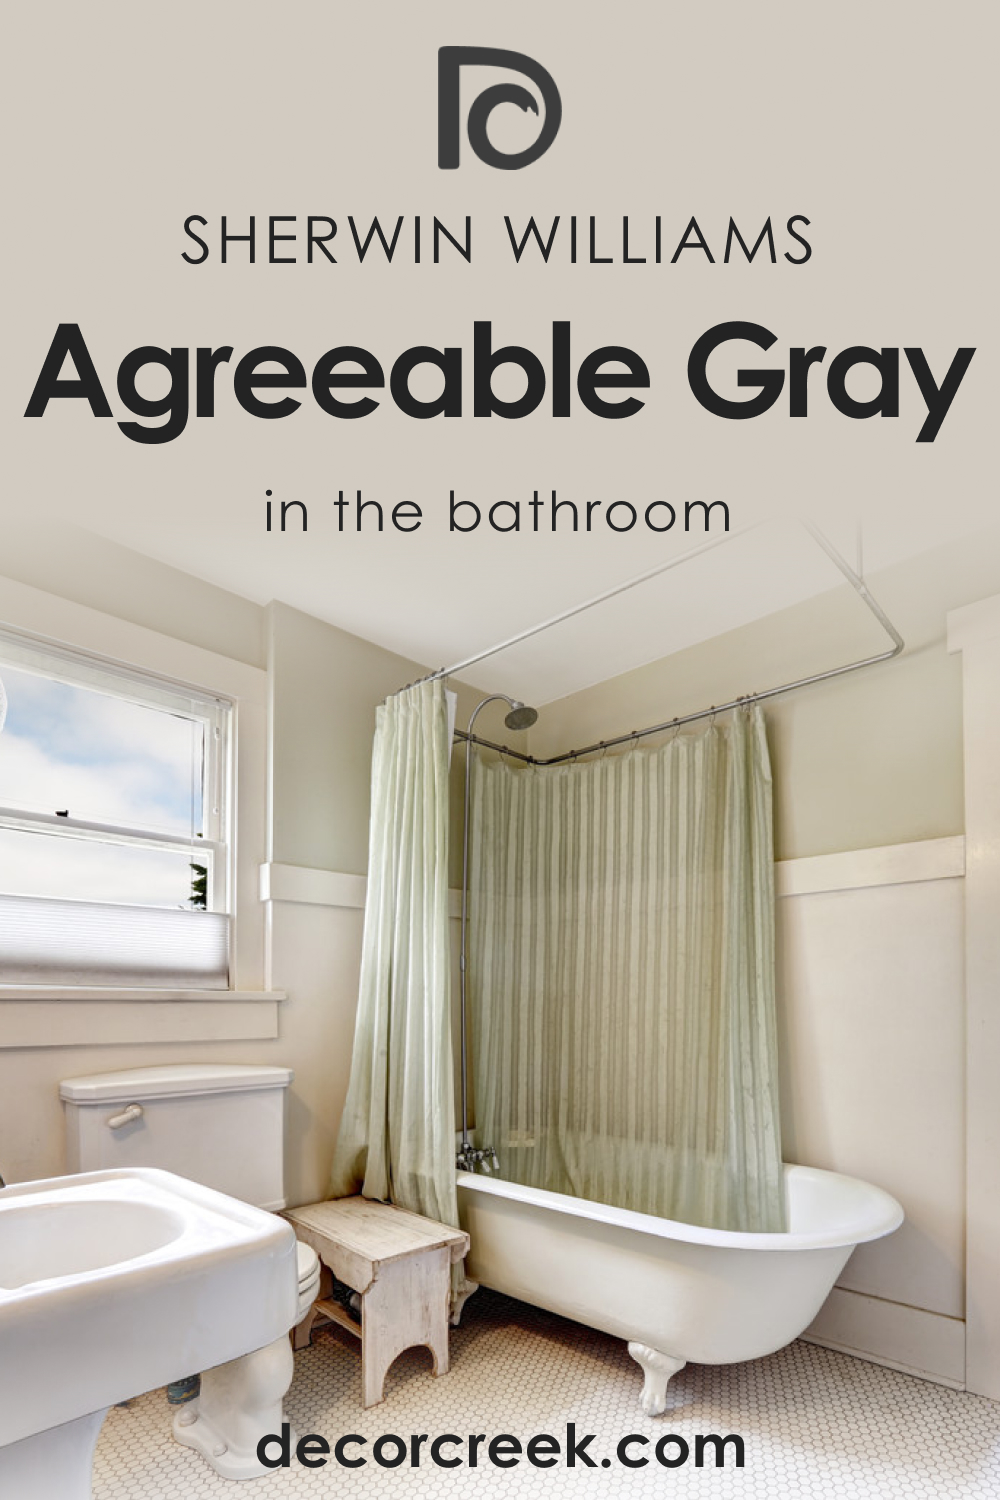 How to Use SW 7029 Agreeable Gray in the Bathroom?